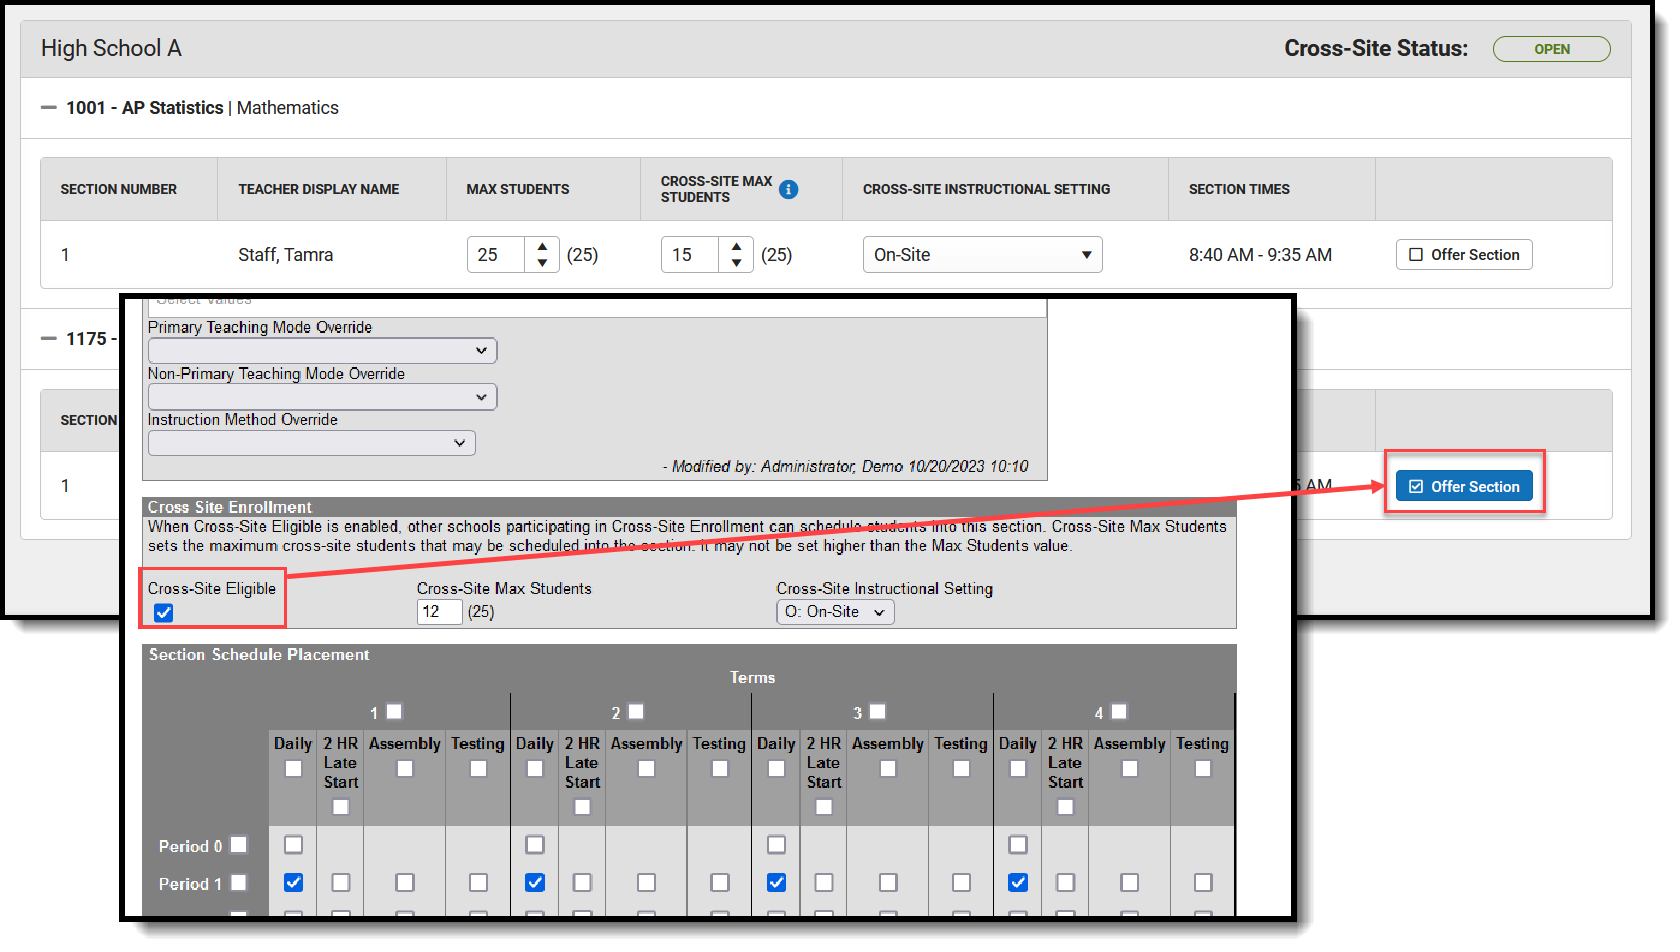 Screenshot of the Offer Section option turned on with the Section Cross-Site Eligible checkbox turned on